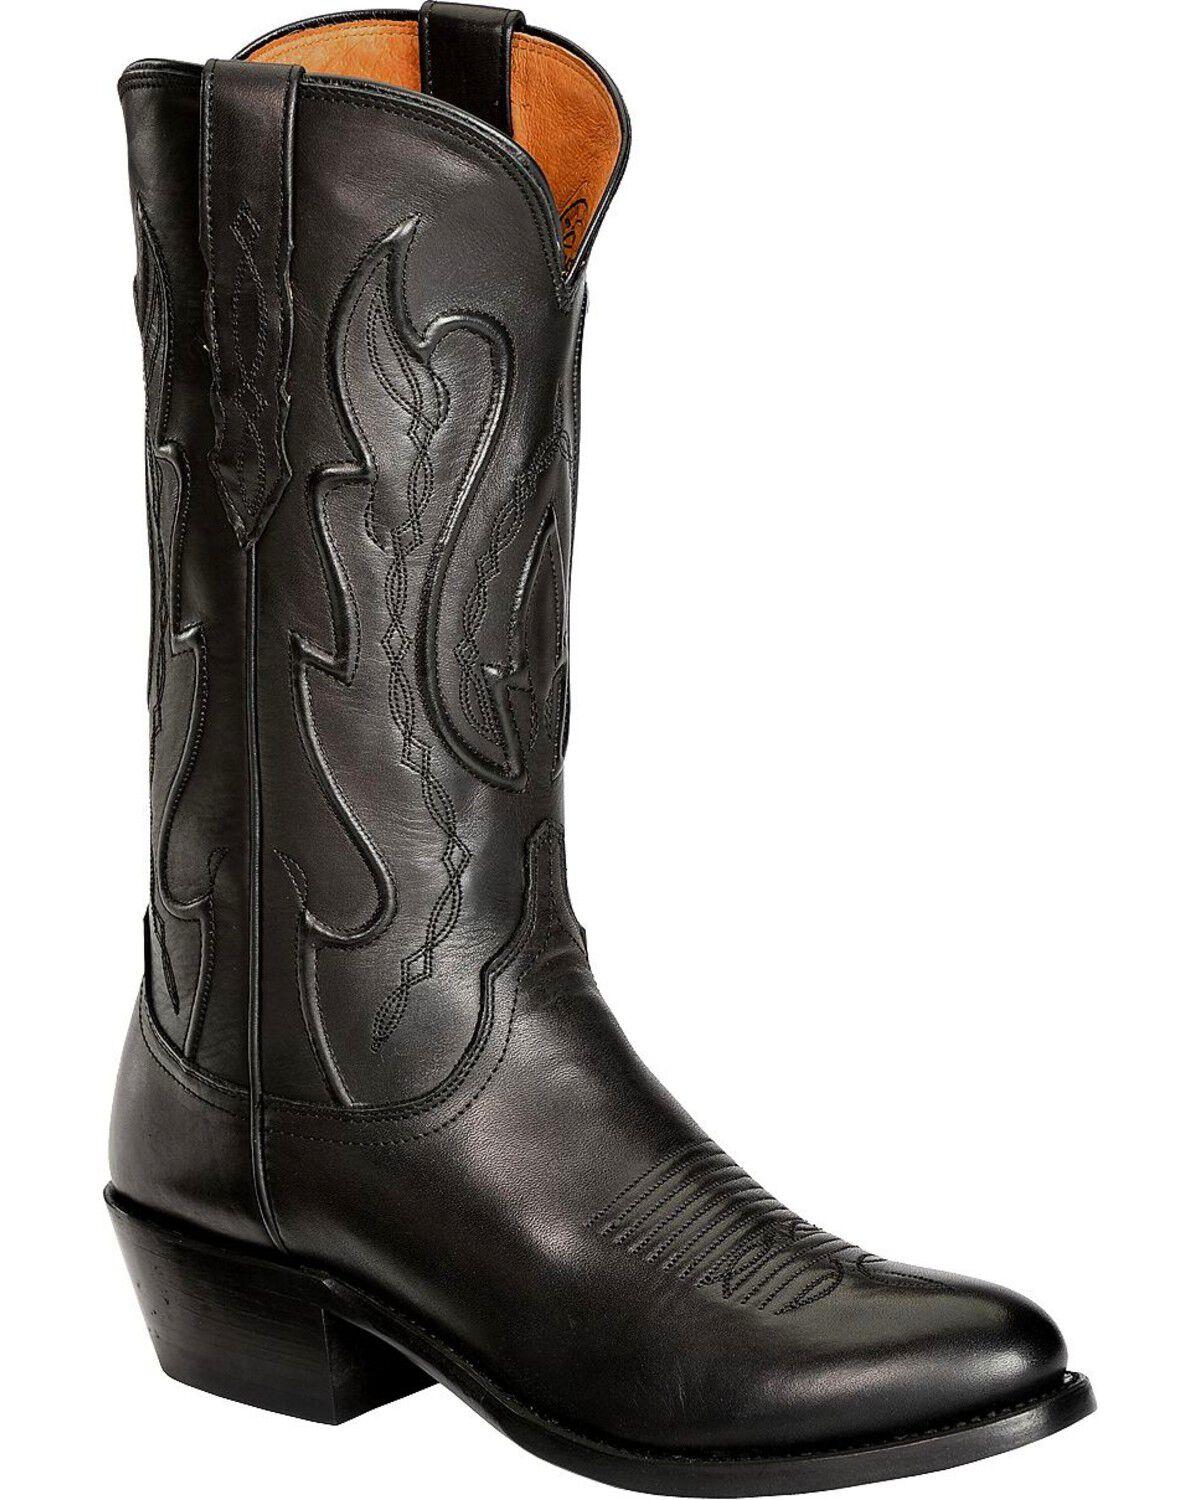 Men's Lucchese Boots - Boot Barn